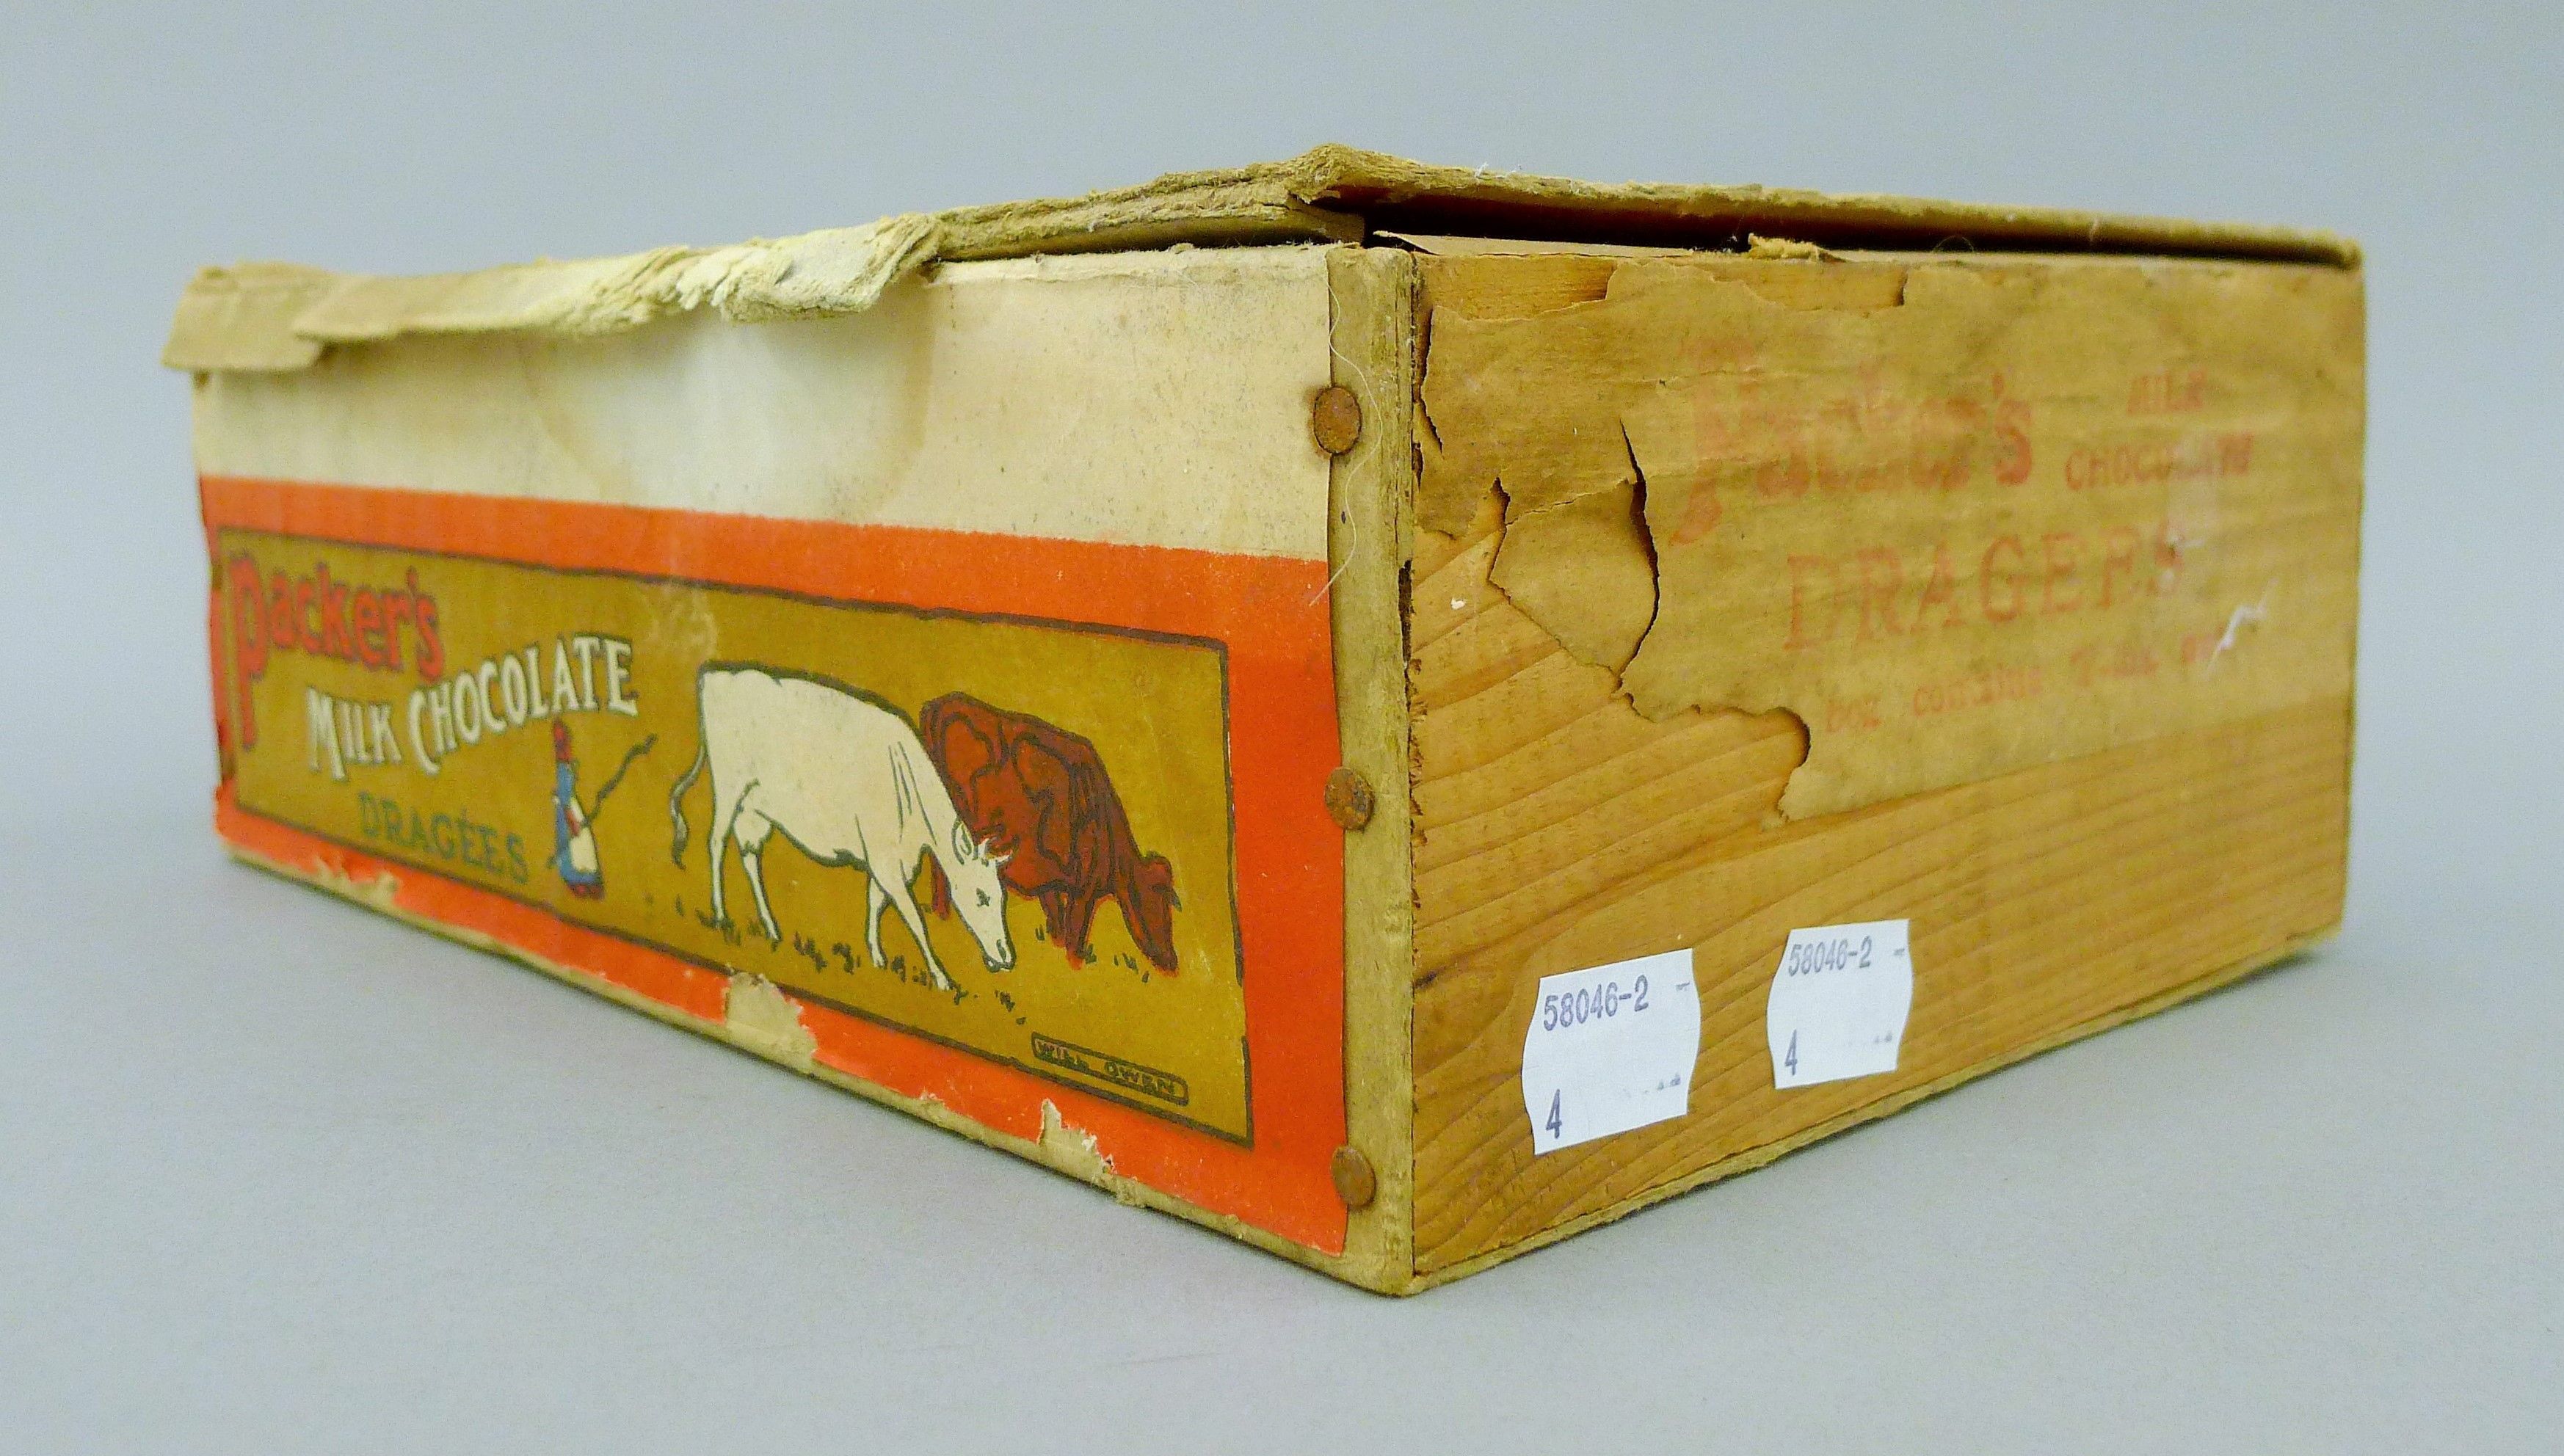 A vintage Packer's milk chocolate box. 27.5 cm long. - Image 3 of 4